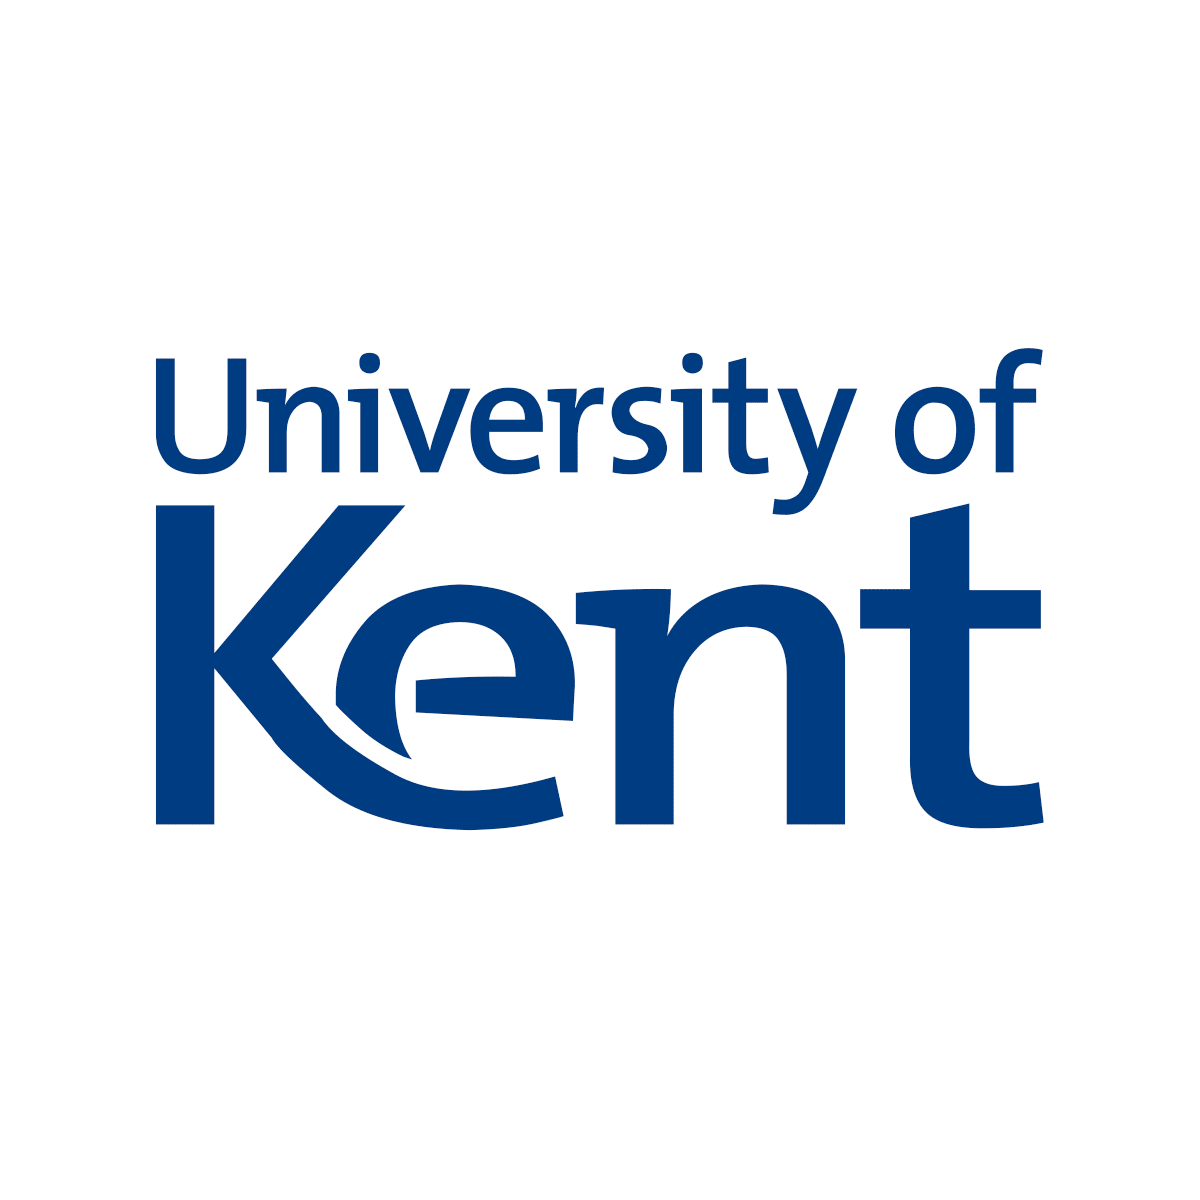 University of Kent Offers Kent funding for Academic Excellence in UK, 2019